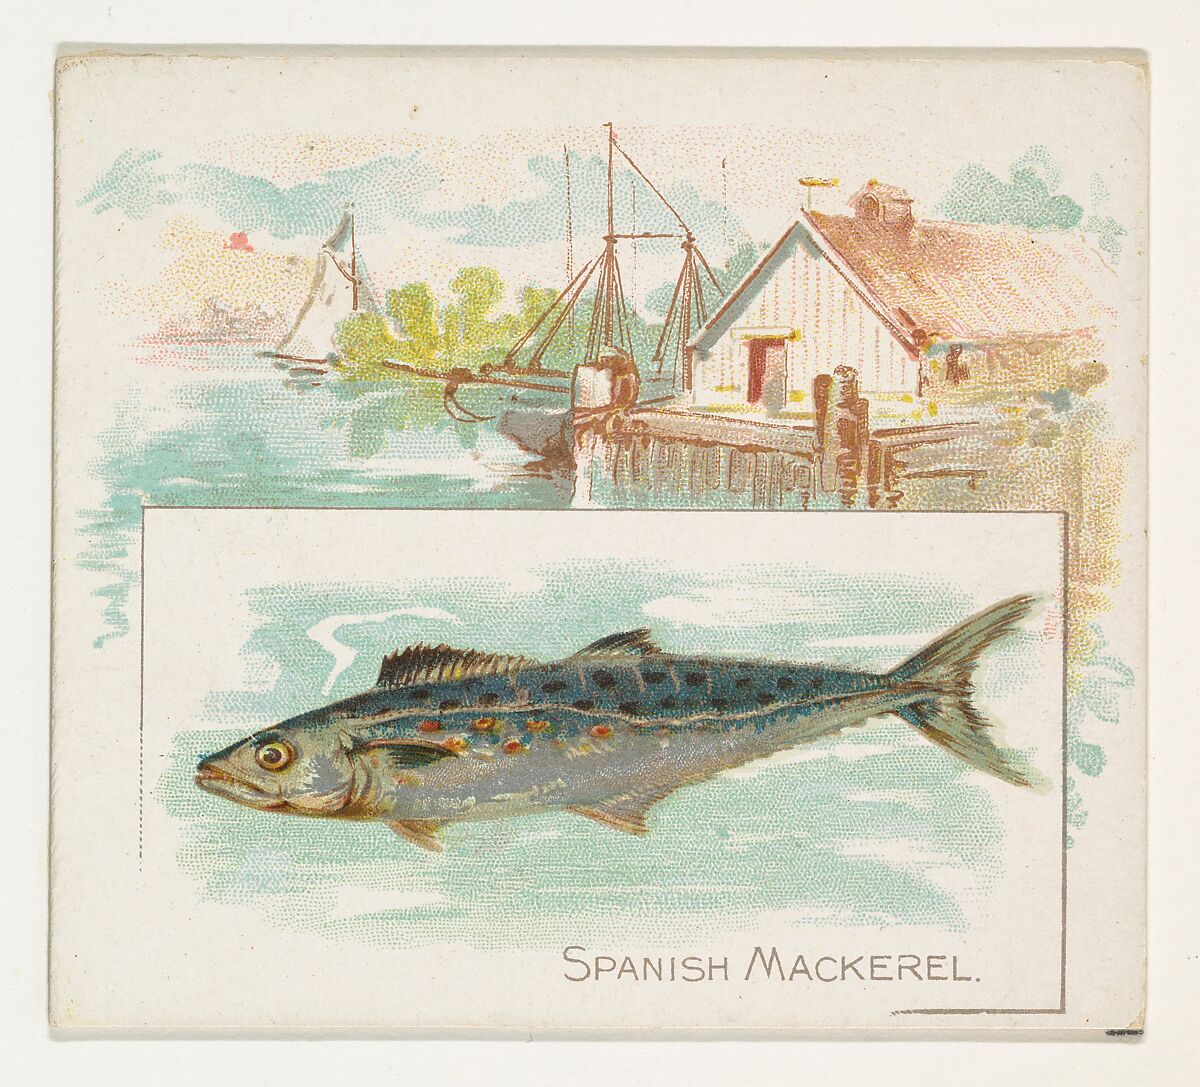 Spanish Mackerel, from Fish from American Waters series (N39) for Allen & Ginter Cigarettes, Issued by Allen &amp; Ginter (American, Richmond, Virginia), Commercial color lithograph 